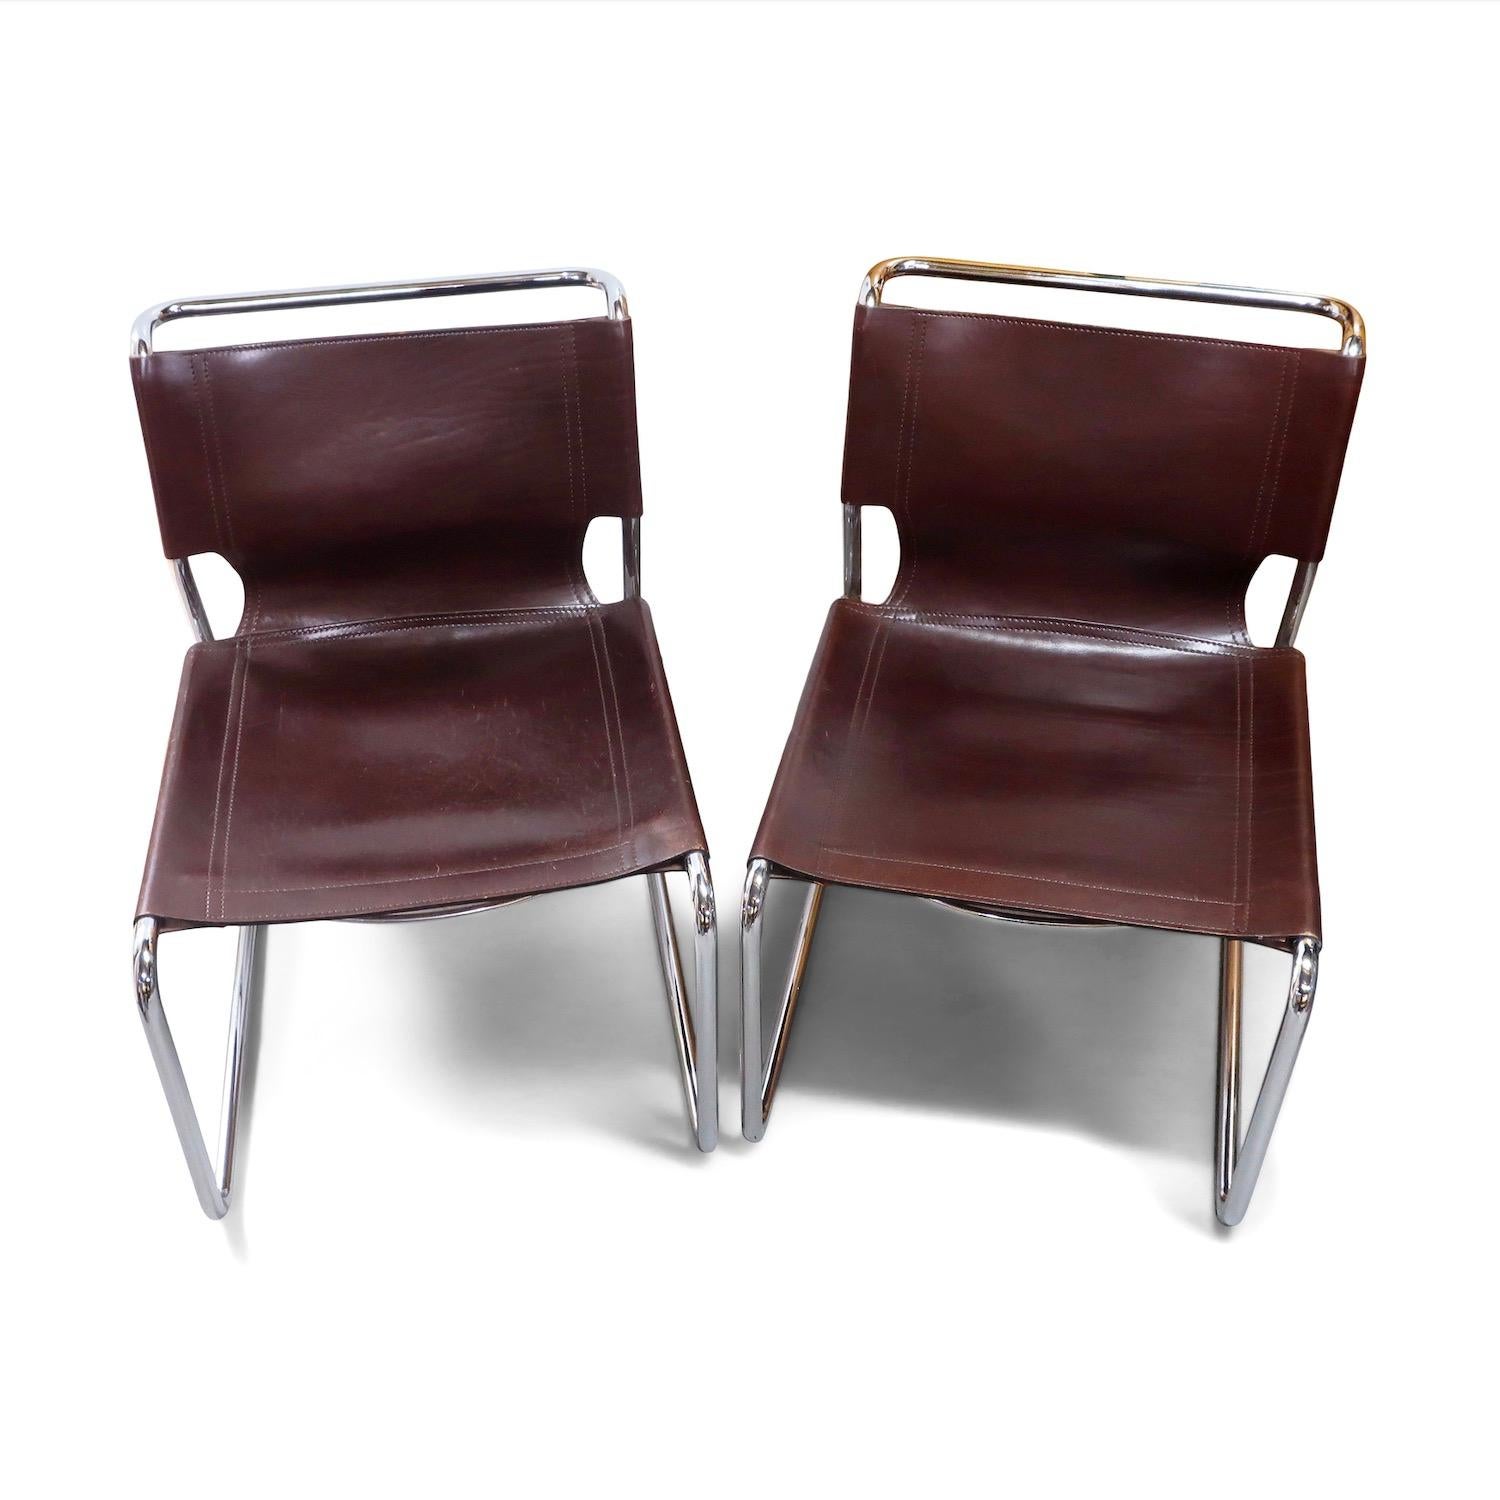 A very comfortable pair of brown leather and chrome chairs in the style of Marcel Breuer and Mart Stam's classic Bauhaus experiments with bent metal and cantilever chairs. Ingeniously designed with chrome supports that resemble a single piece of